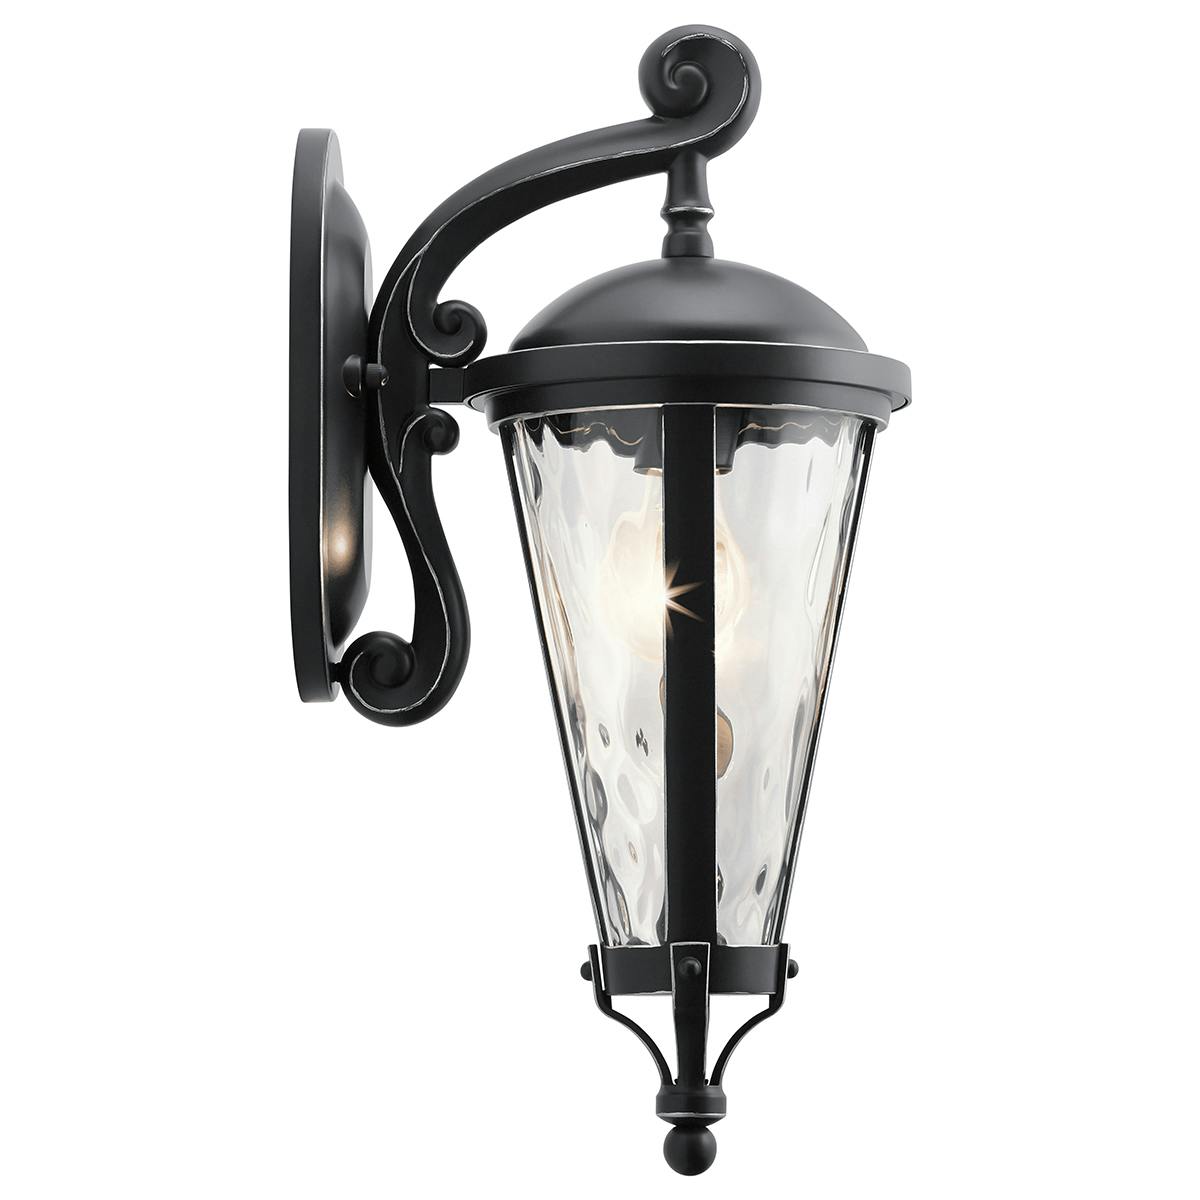 Profile view of the Cresleigh 18" 1 Light Wall Light Black on a white background